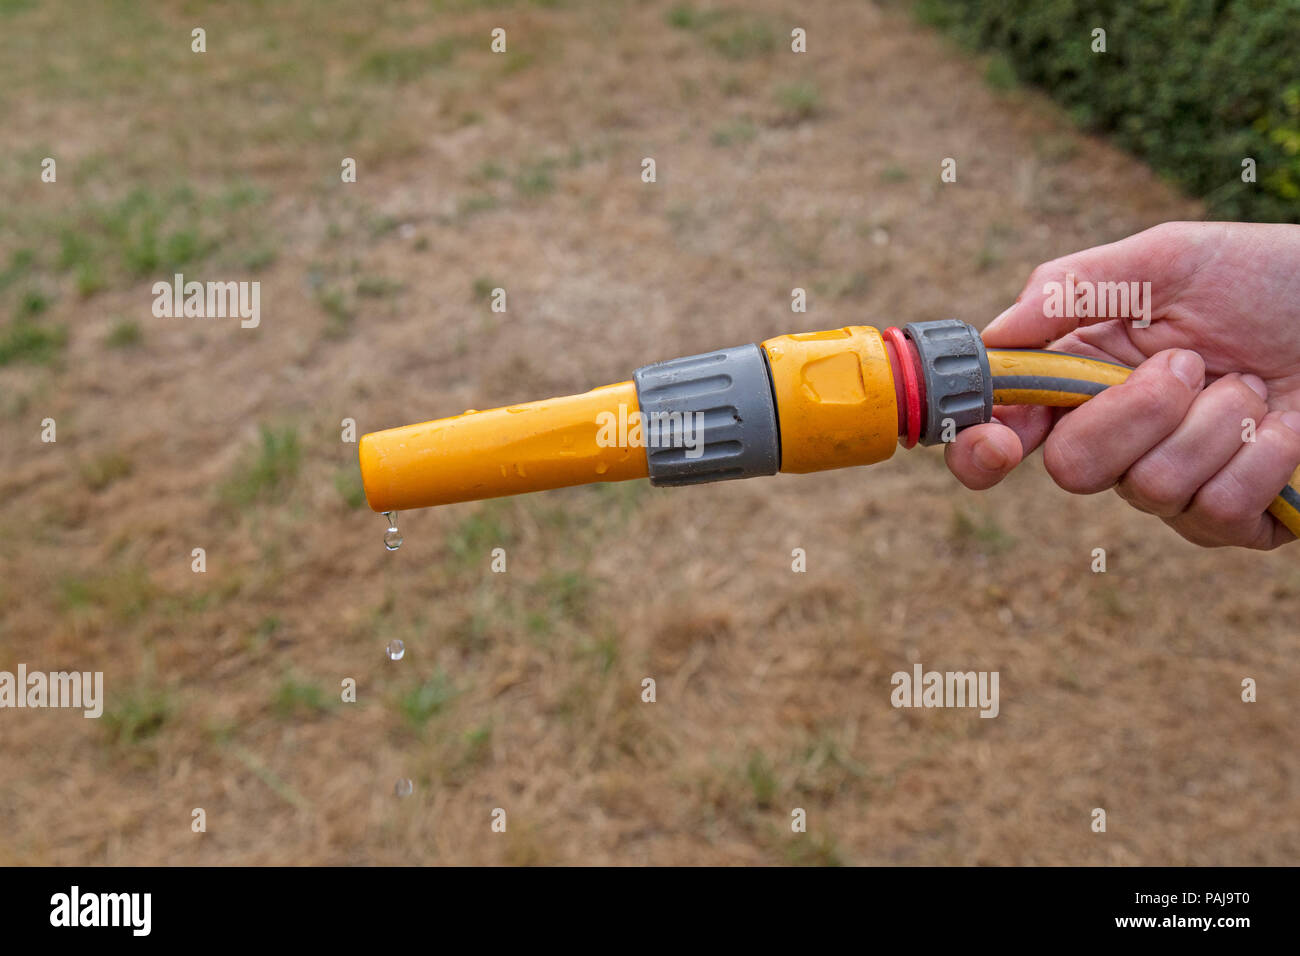 A garden hose pipe attempting to water a dry, brown, area of grass lawn, but only a few drops of water coming from hose. Single hand in view. Stock Photo